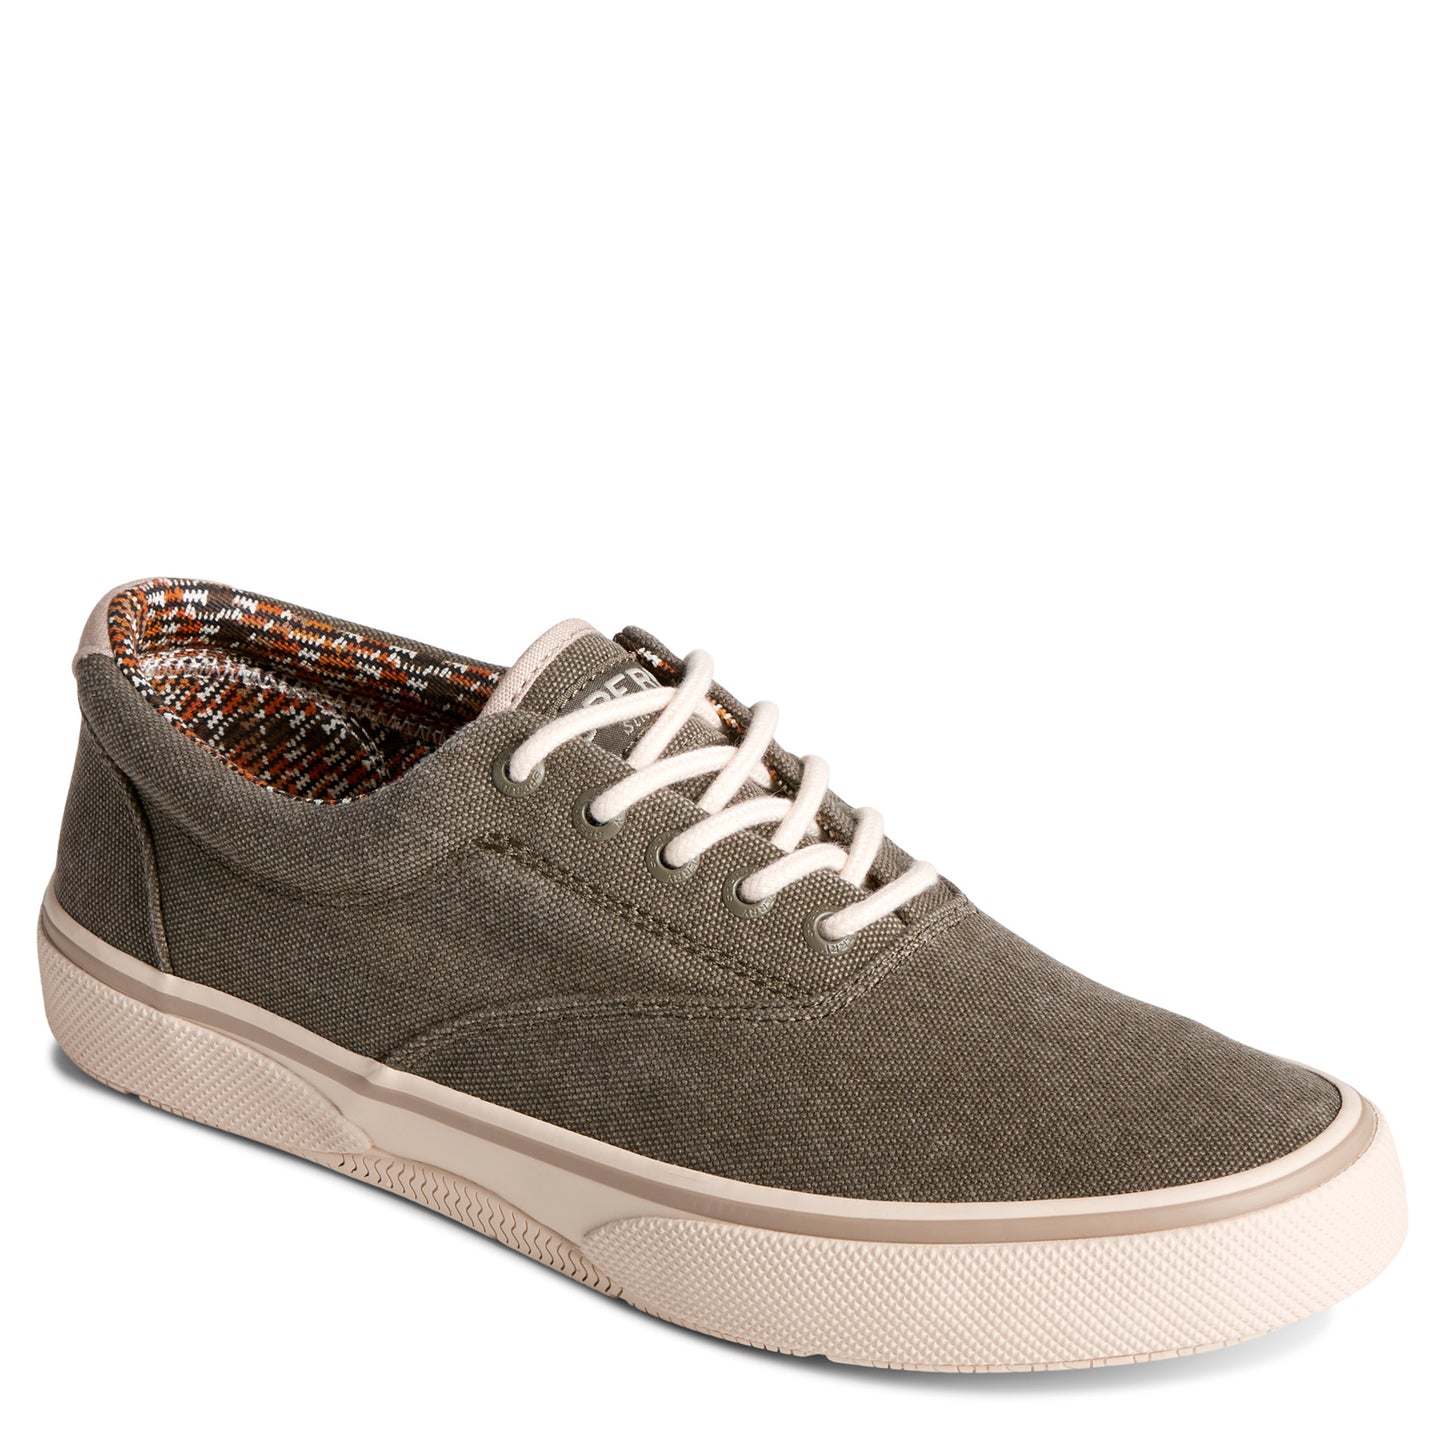 Peltz Shoes  Men's Sperry Halyard SeaCycled CVO Sneaker Olive STS25391